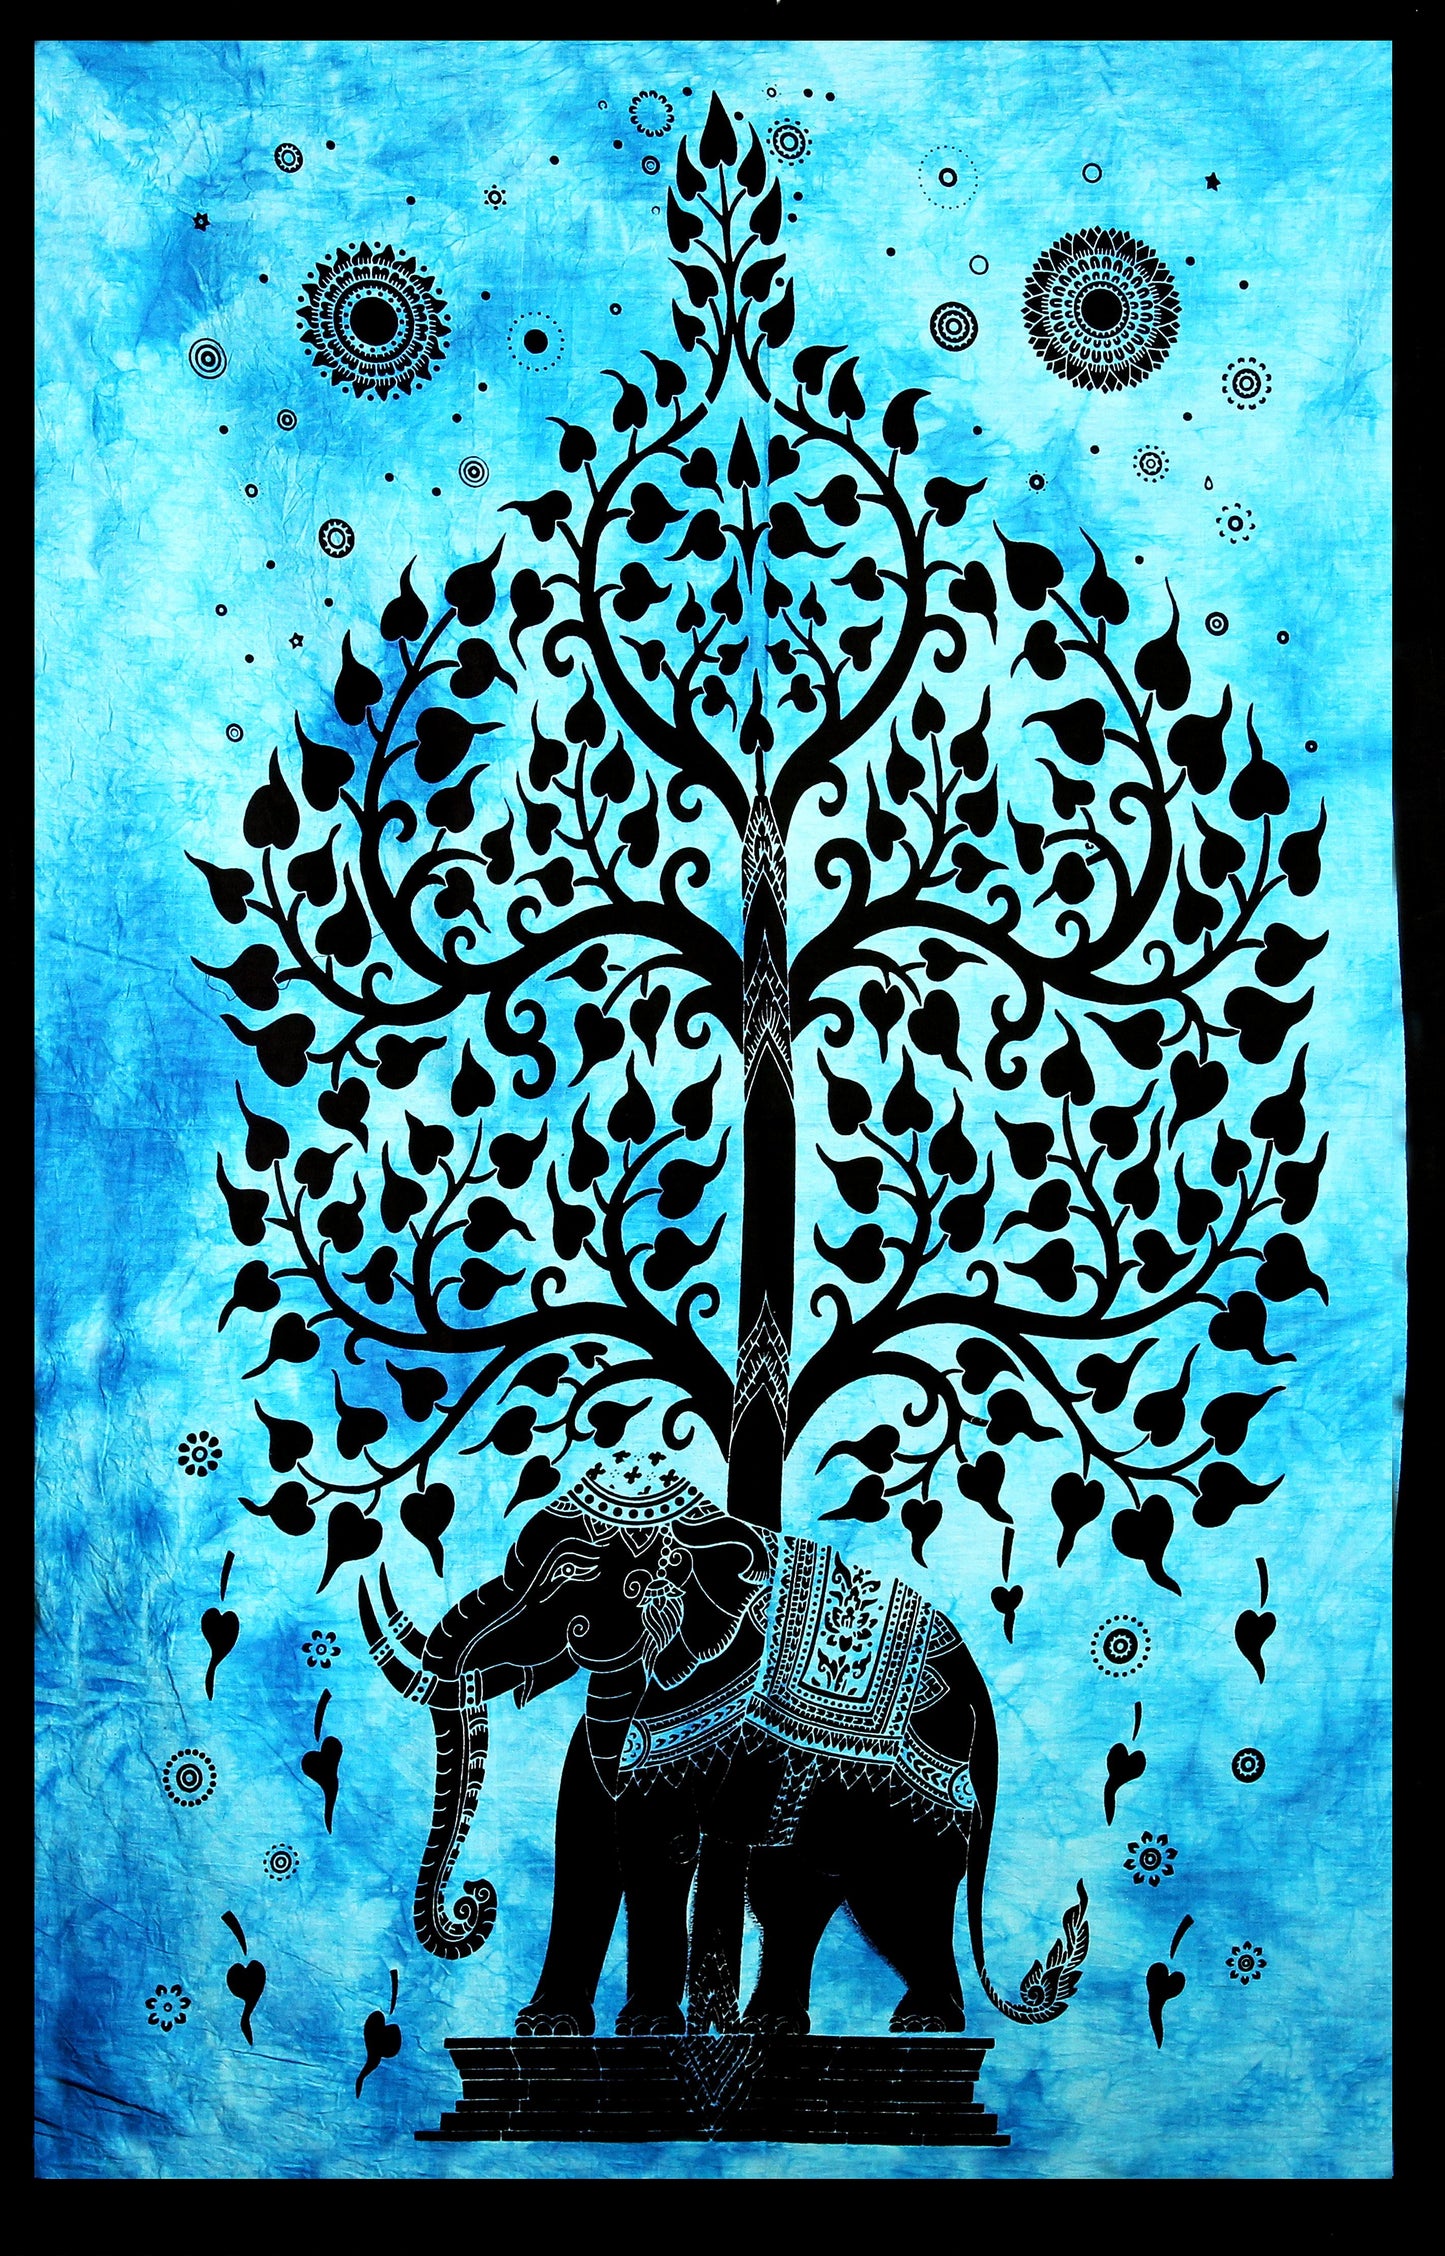 Hand printed Mini Elephant Tree of Life Tapestry Wall Hangings - Available in 6 Colors